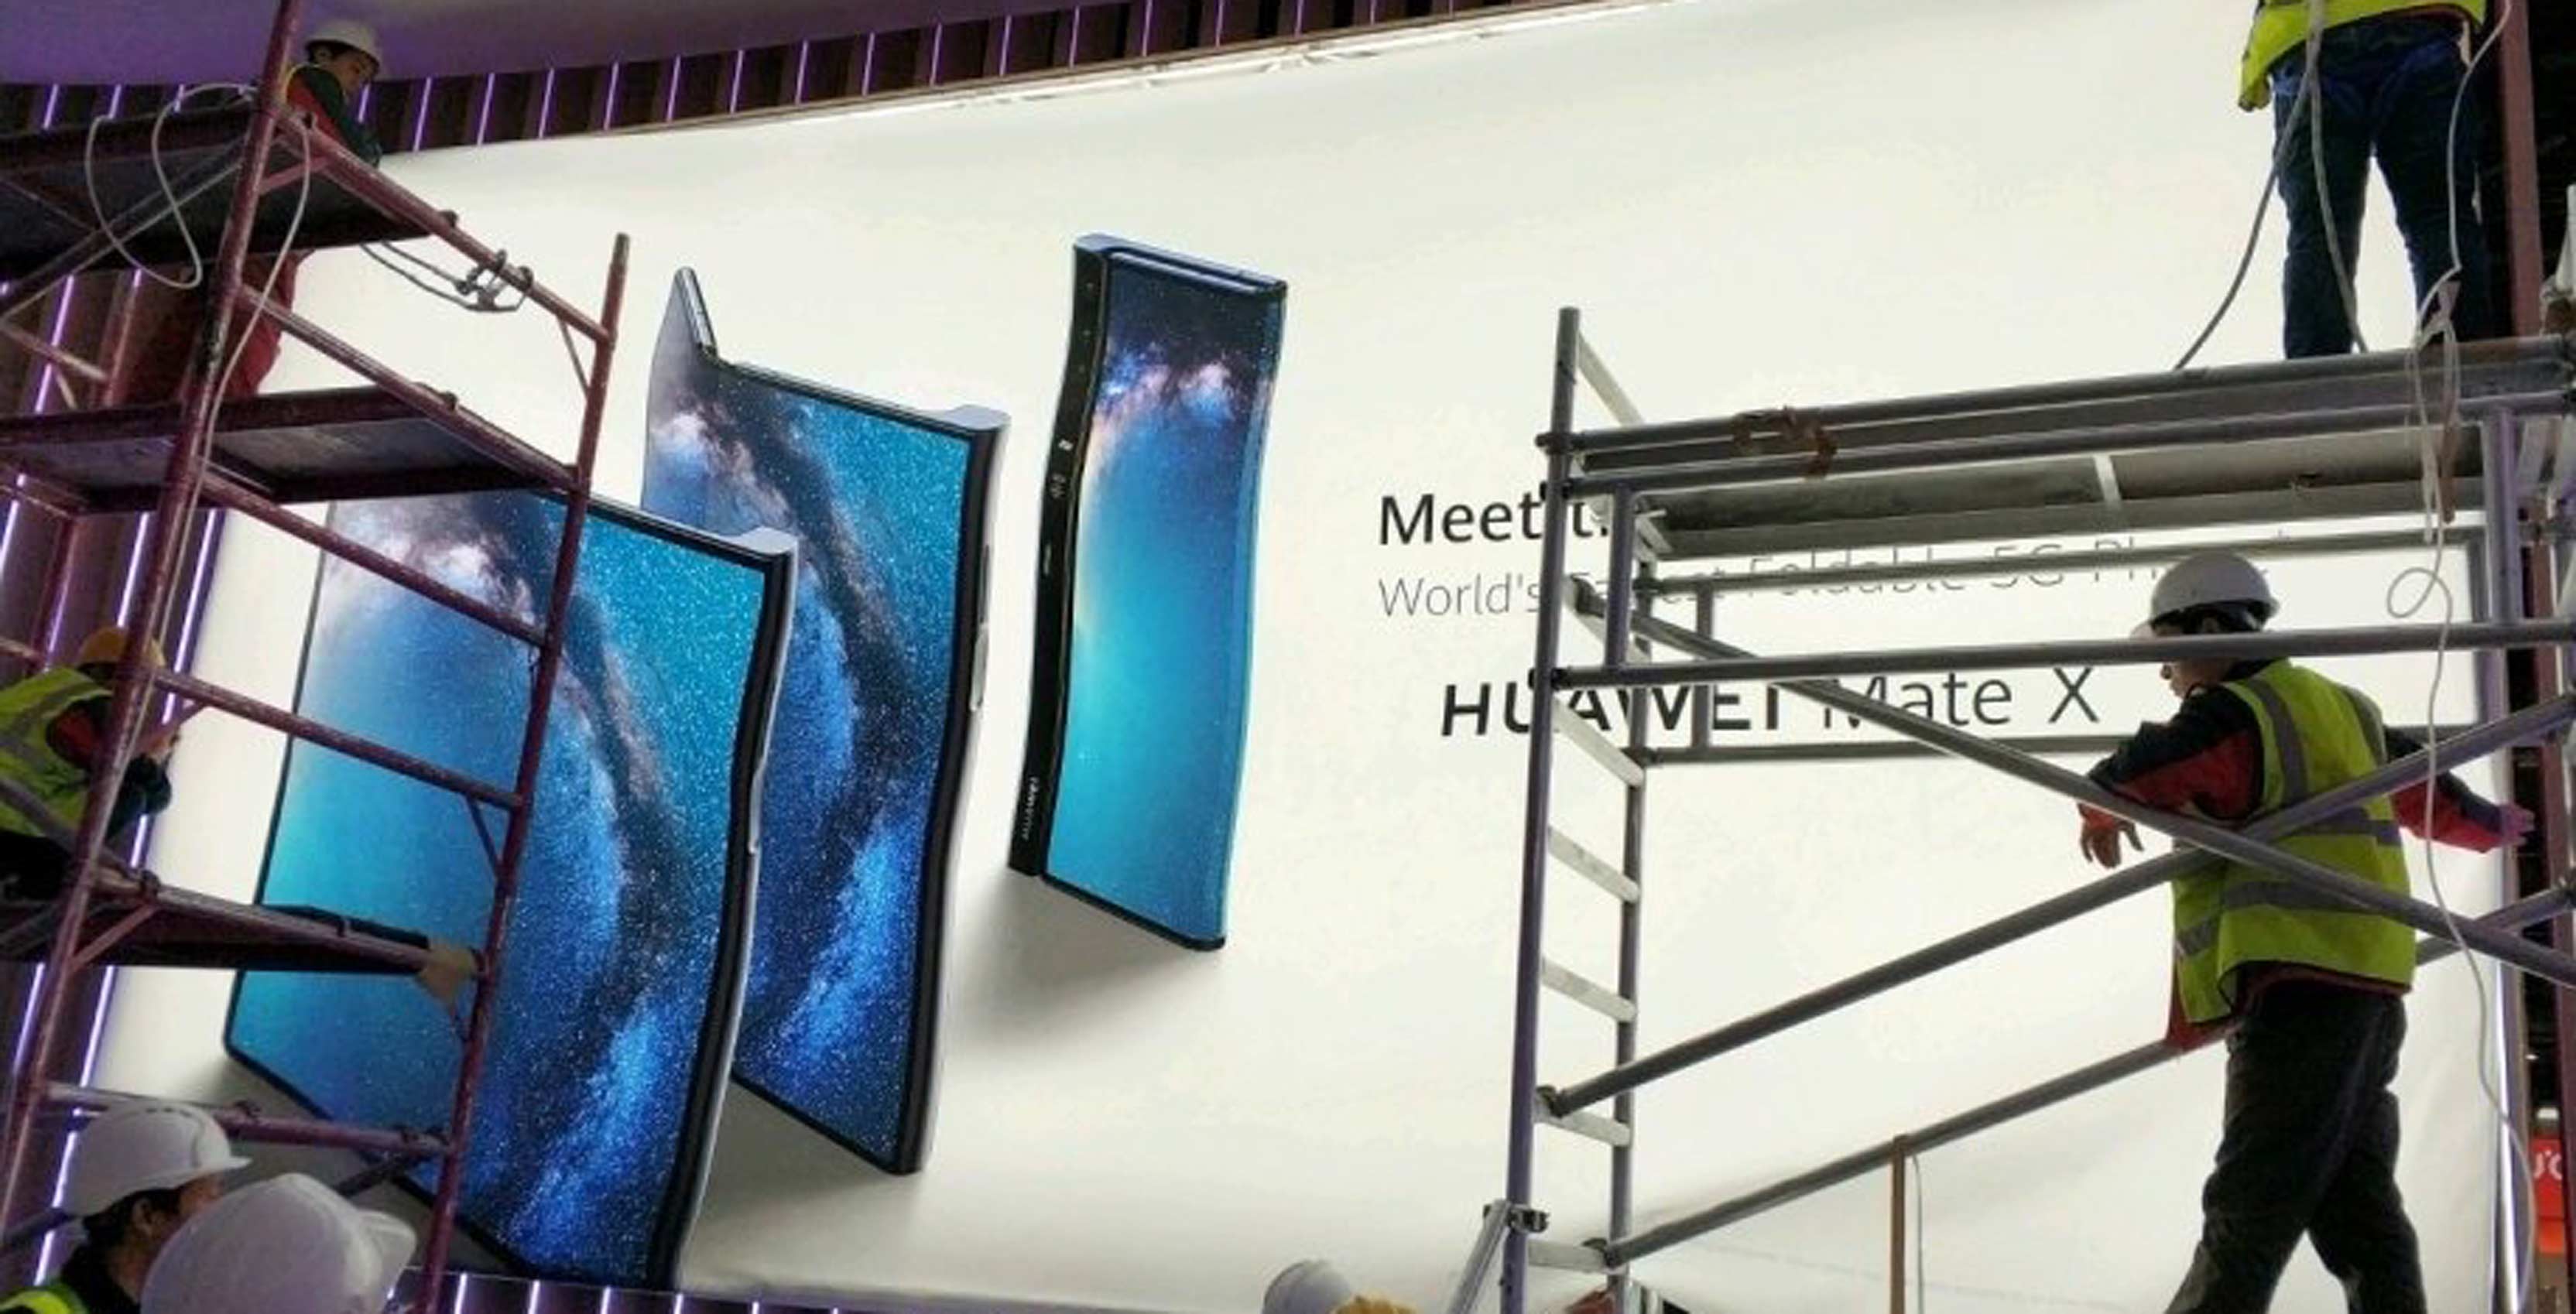 A billboard showing Huawei's upcoming Mate X foldable display smartphone